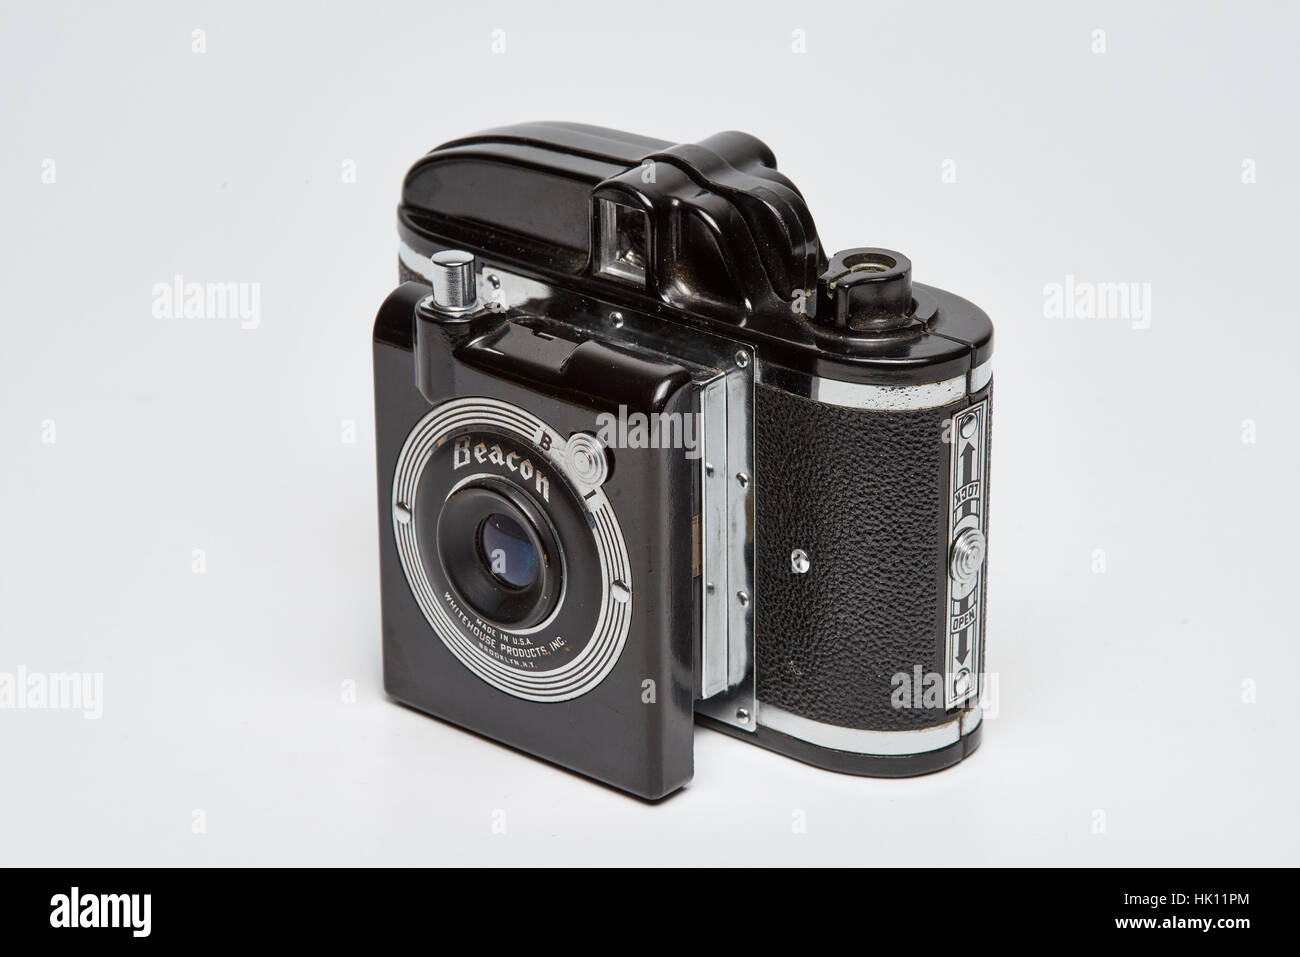 Beacon analog film camera made by Whitehouse Products in Brooklyn, New York. Plastic rollfilm camera for 3x4cm on 127 film. Plastic lens, simple sprin Stock Photo